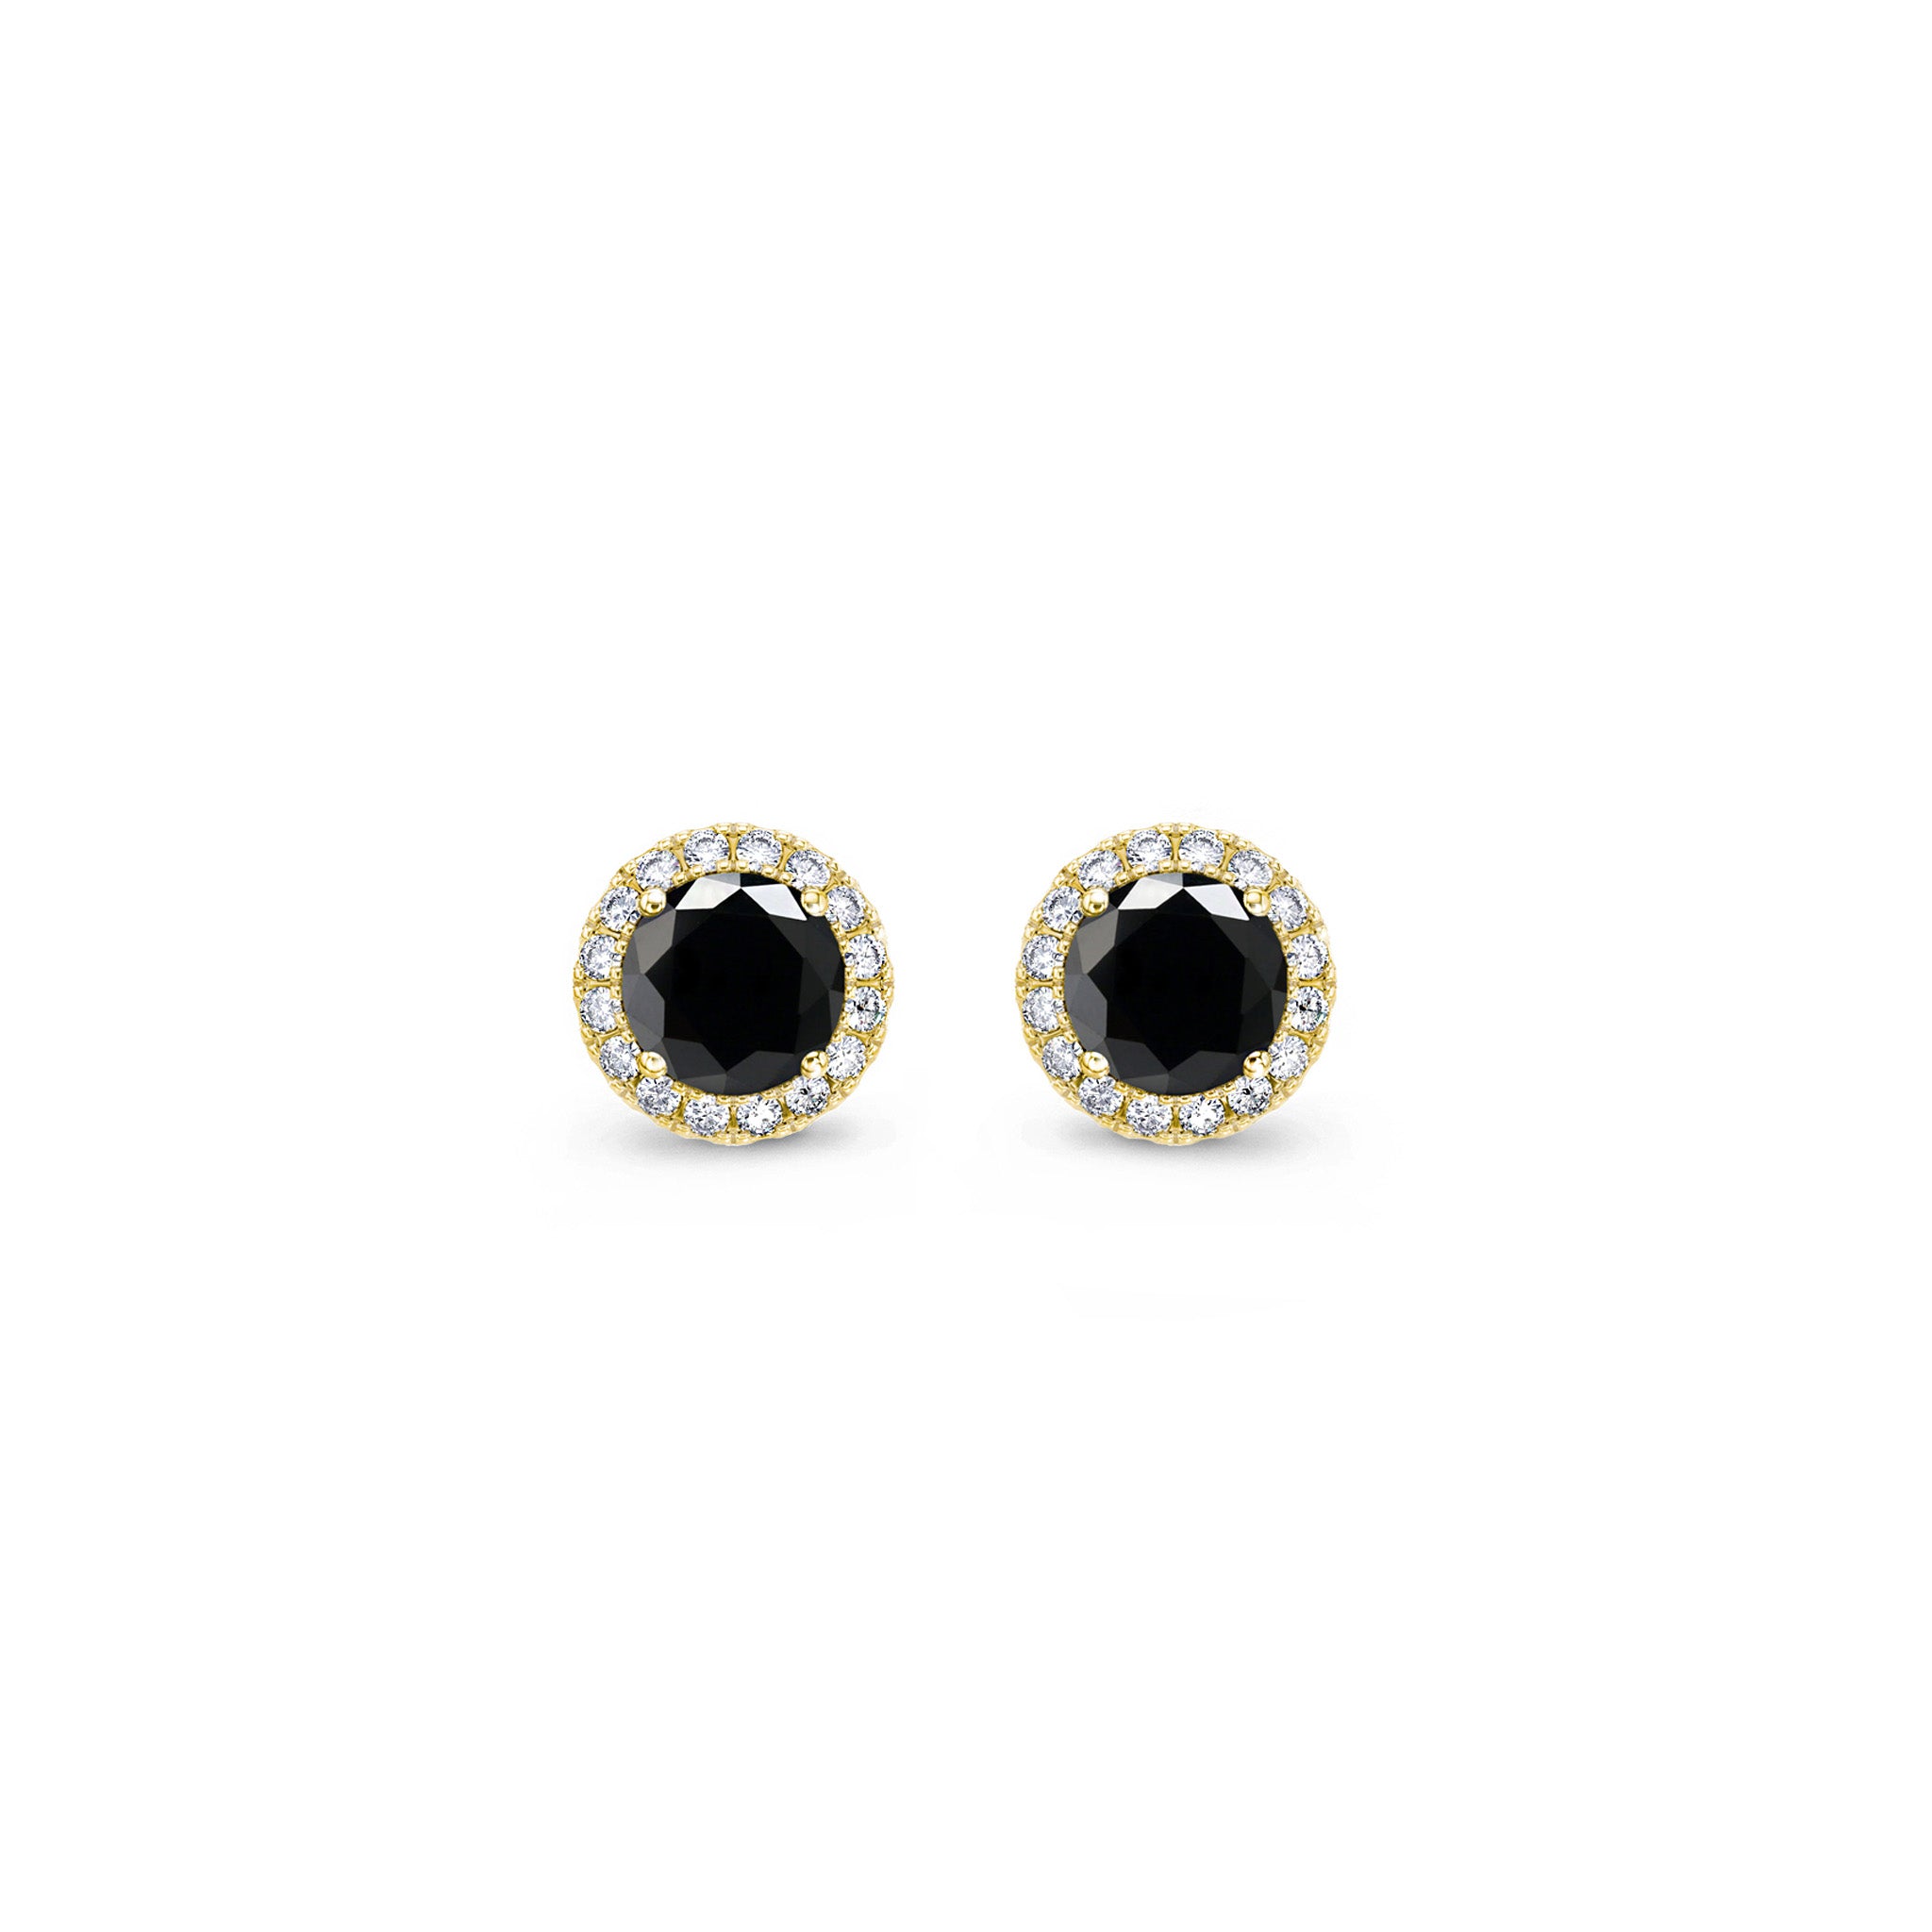 Shimansky - Black Diamond Microset Earrings 1.00ct crafted in 18K Yellow Gold